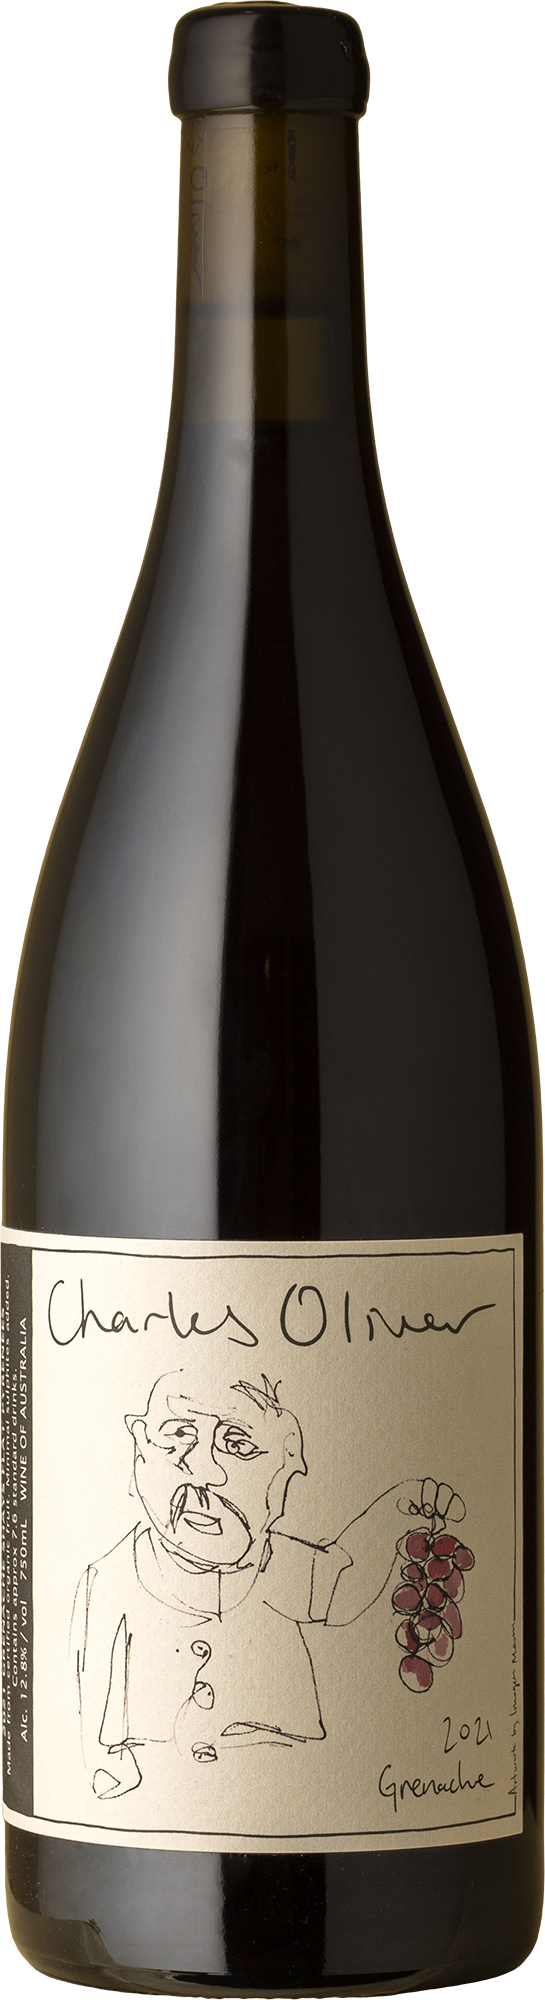 Charles Oliver - Shay's Flat Grenache 2021 Red Wine